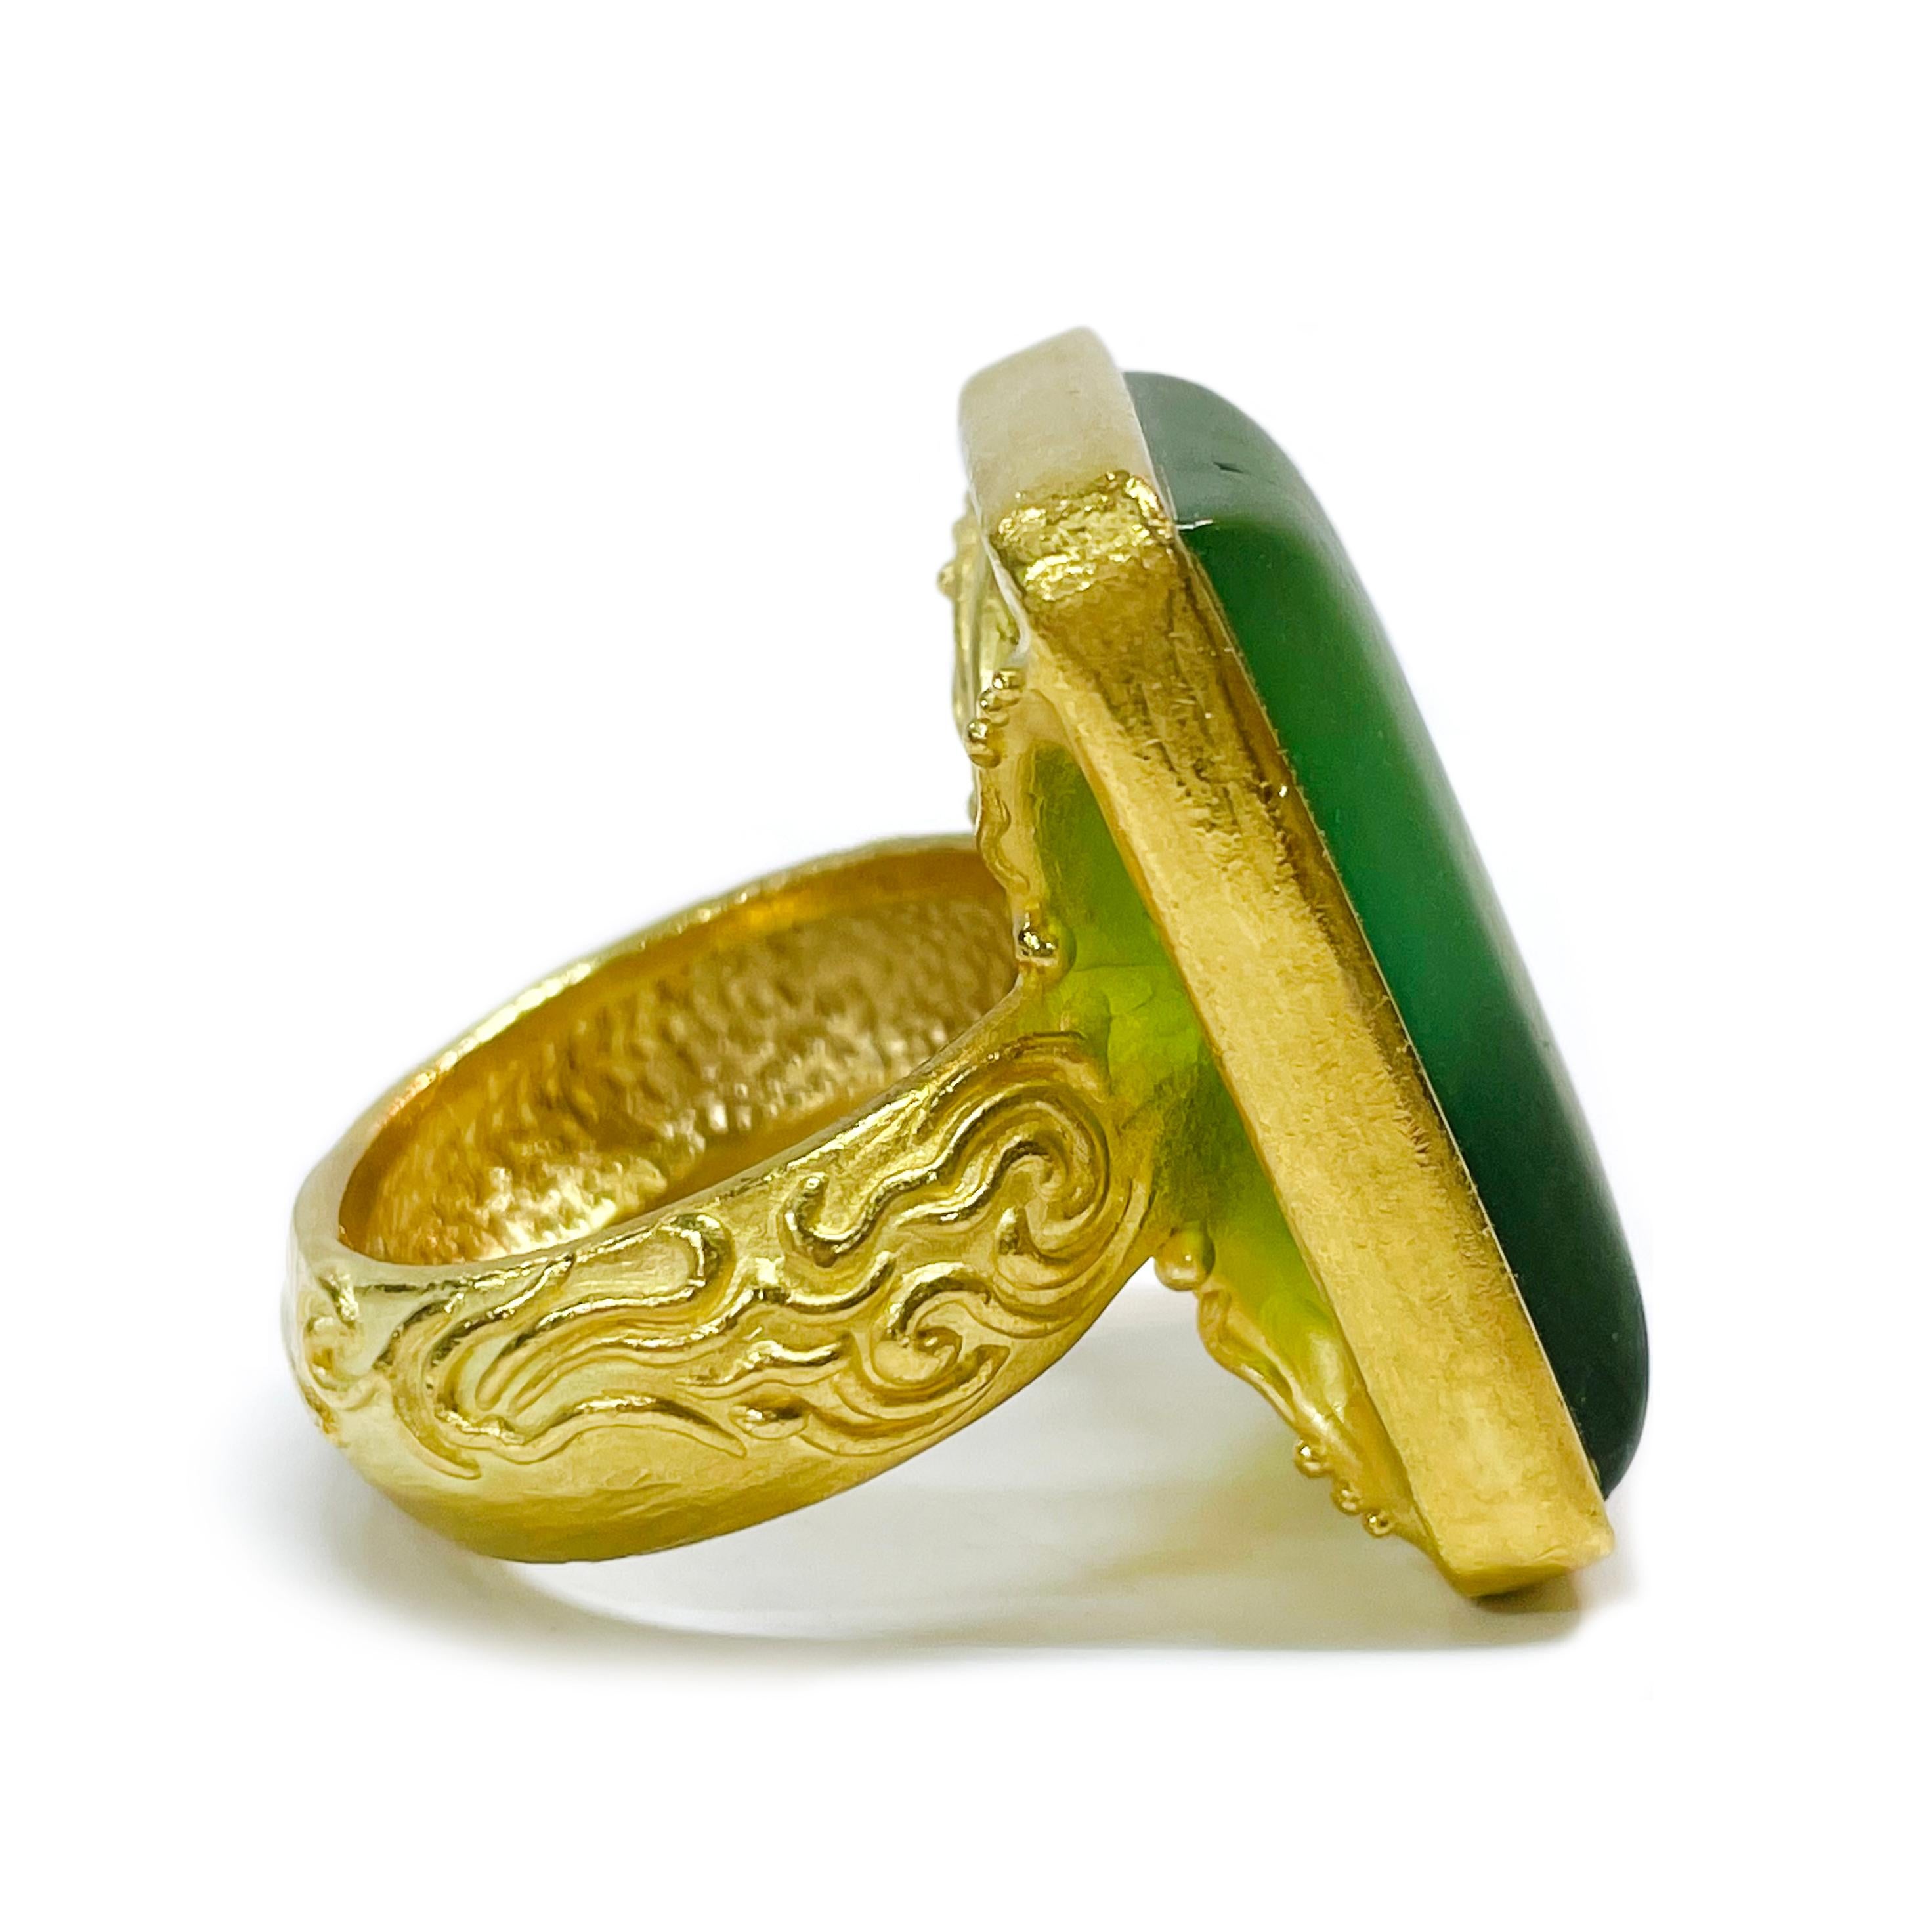 Denise Roberge 22 Karat Yellow Gold Agate Ring. The heavyweight ring features a rectangular opaque green Chalcedony cabochon measuring 20.3 x 26.4mm. The 8.24mm wide band has wave-like scroll detail on both sides. Stamped on the inside of the band